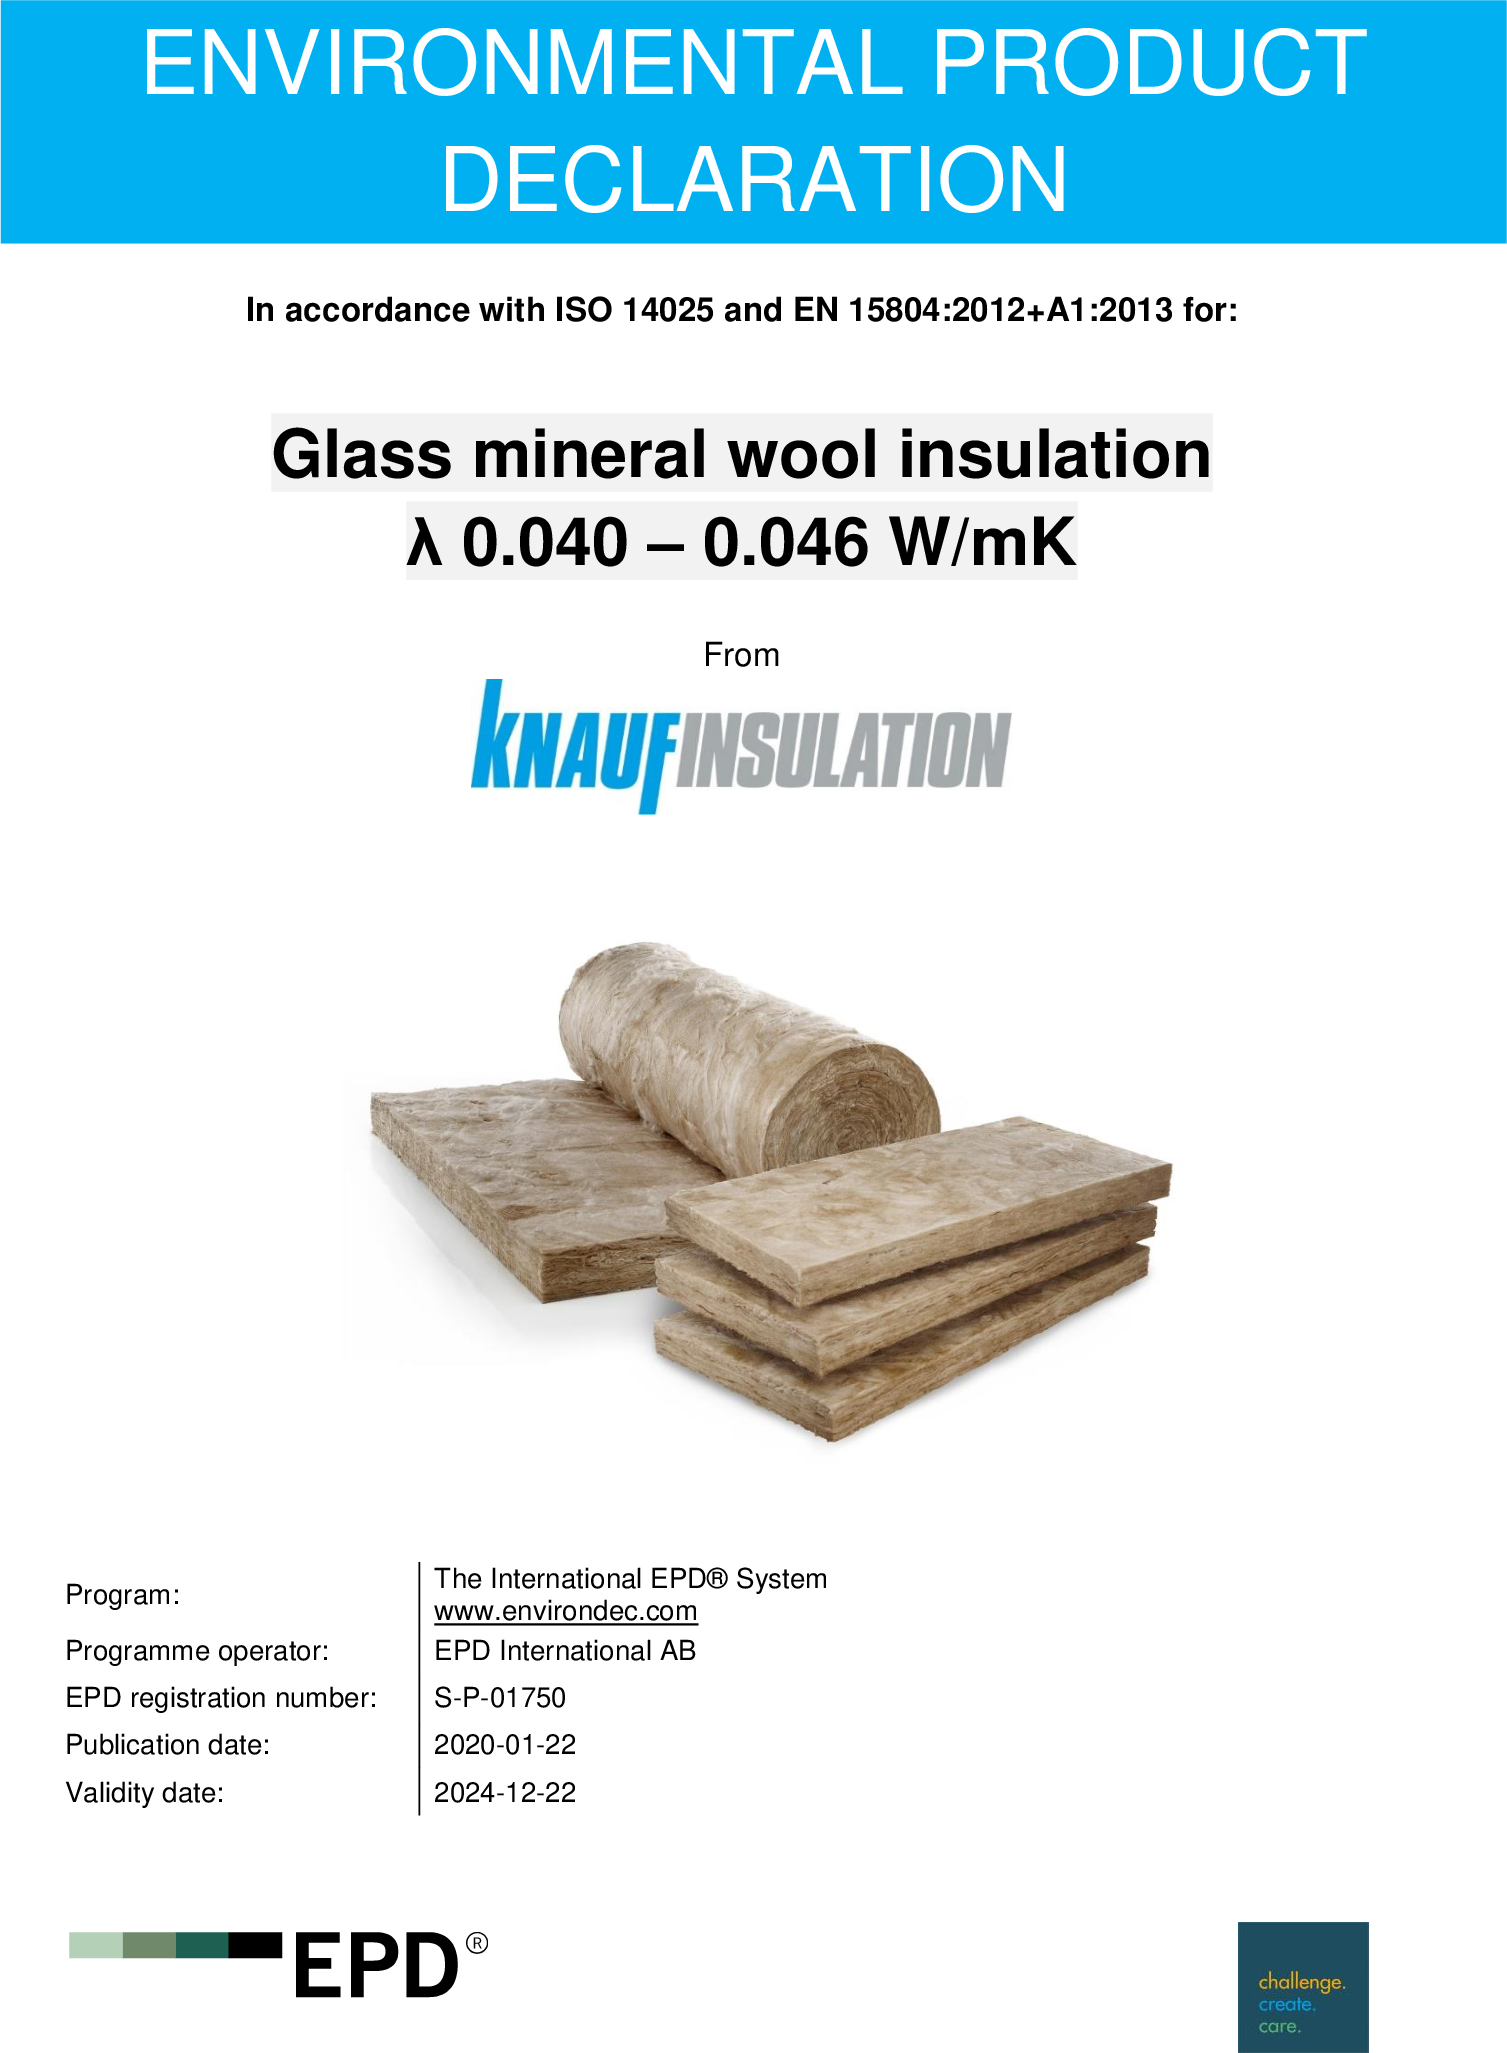 Environment Product Declaration (EPD) - Glass Mineral Wool 0.040 – 0.046 W/mK